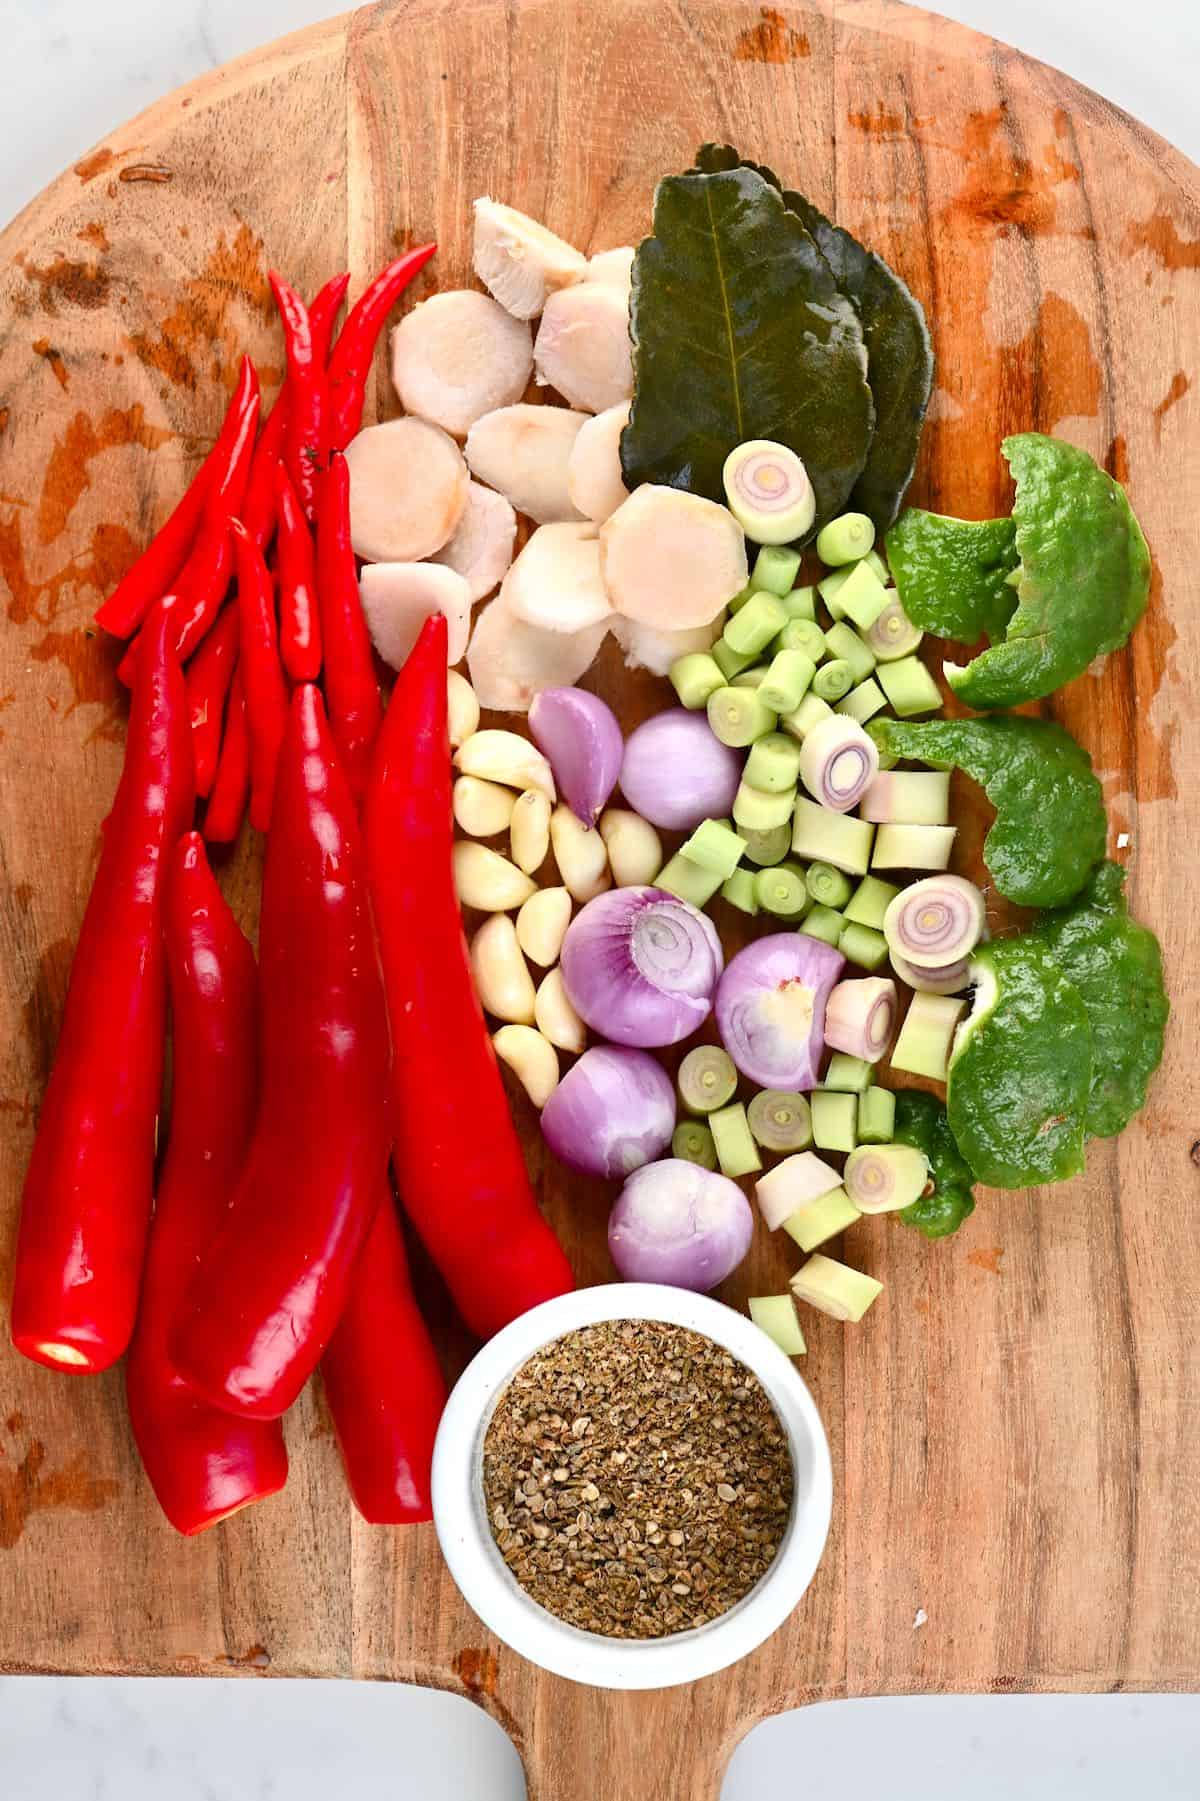 Chopped ingredients for Thai Red Curry Paste